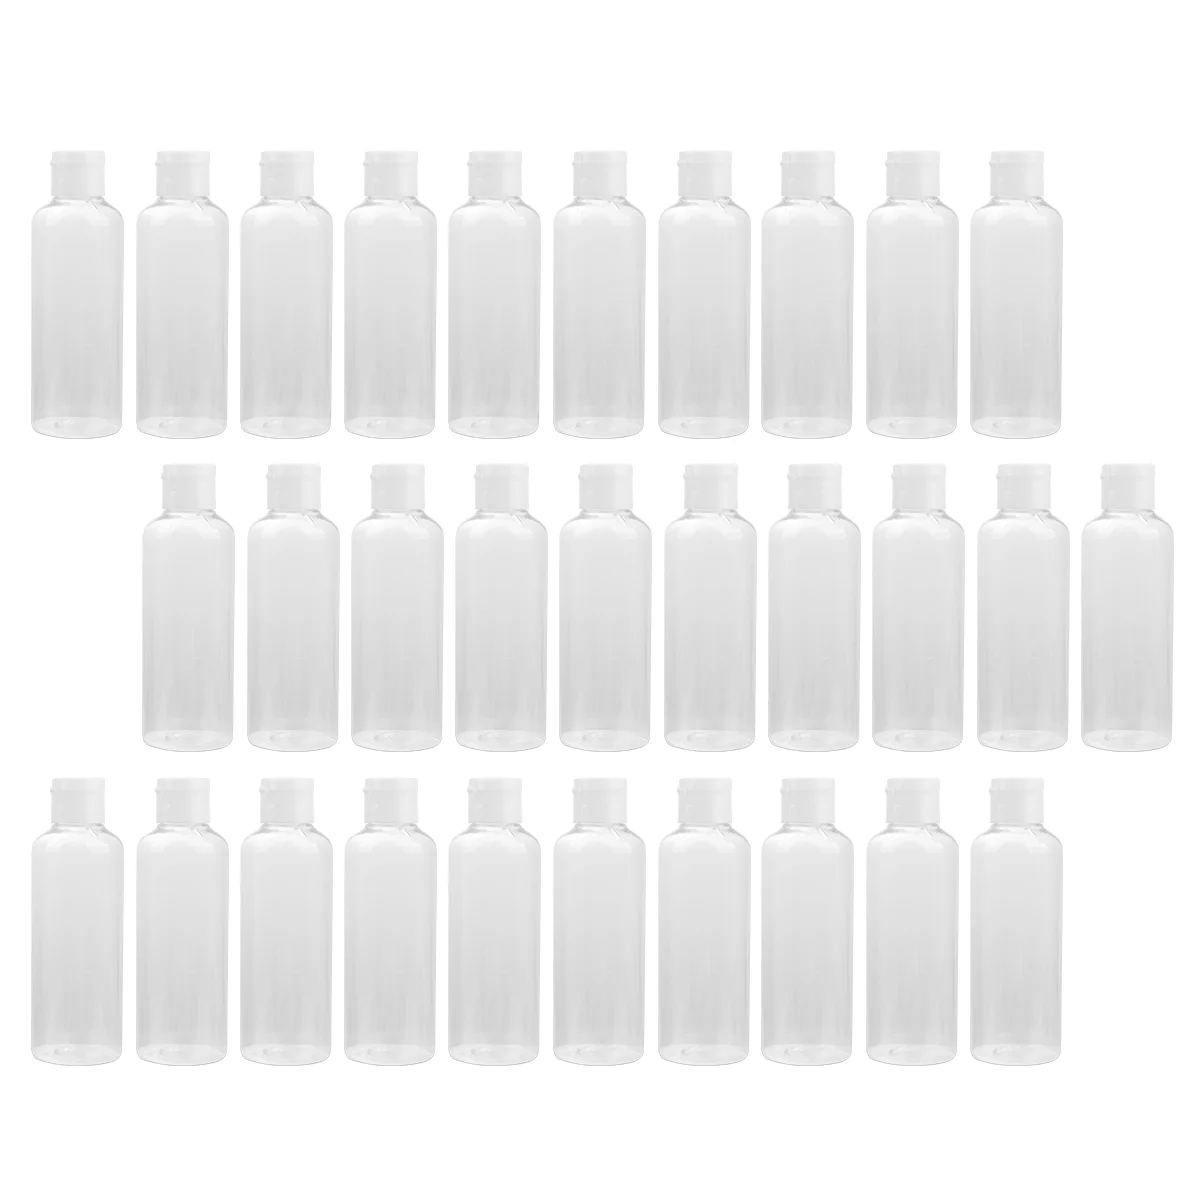 

30Pcs Empty Bottles Portable Travel Comestic Bottles Set Refillable Storage Containers with Caps for Shampoo Lotion ( 100ml )